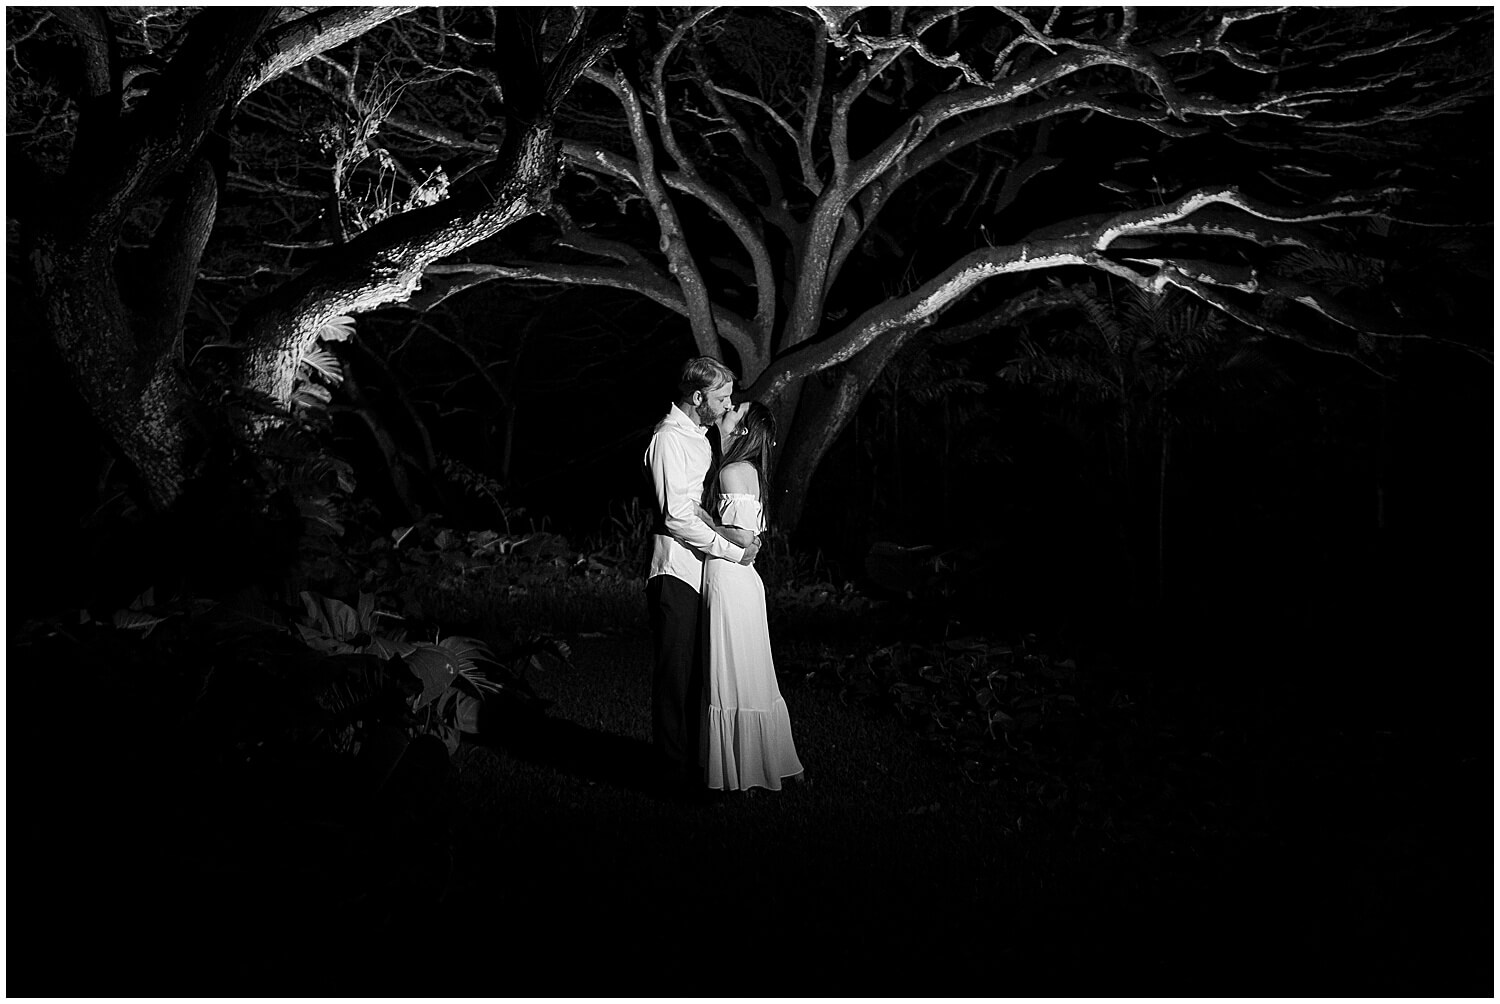 flash portrait wedding photography of bride and groom by Elle rose photo